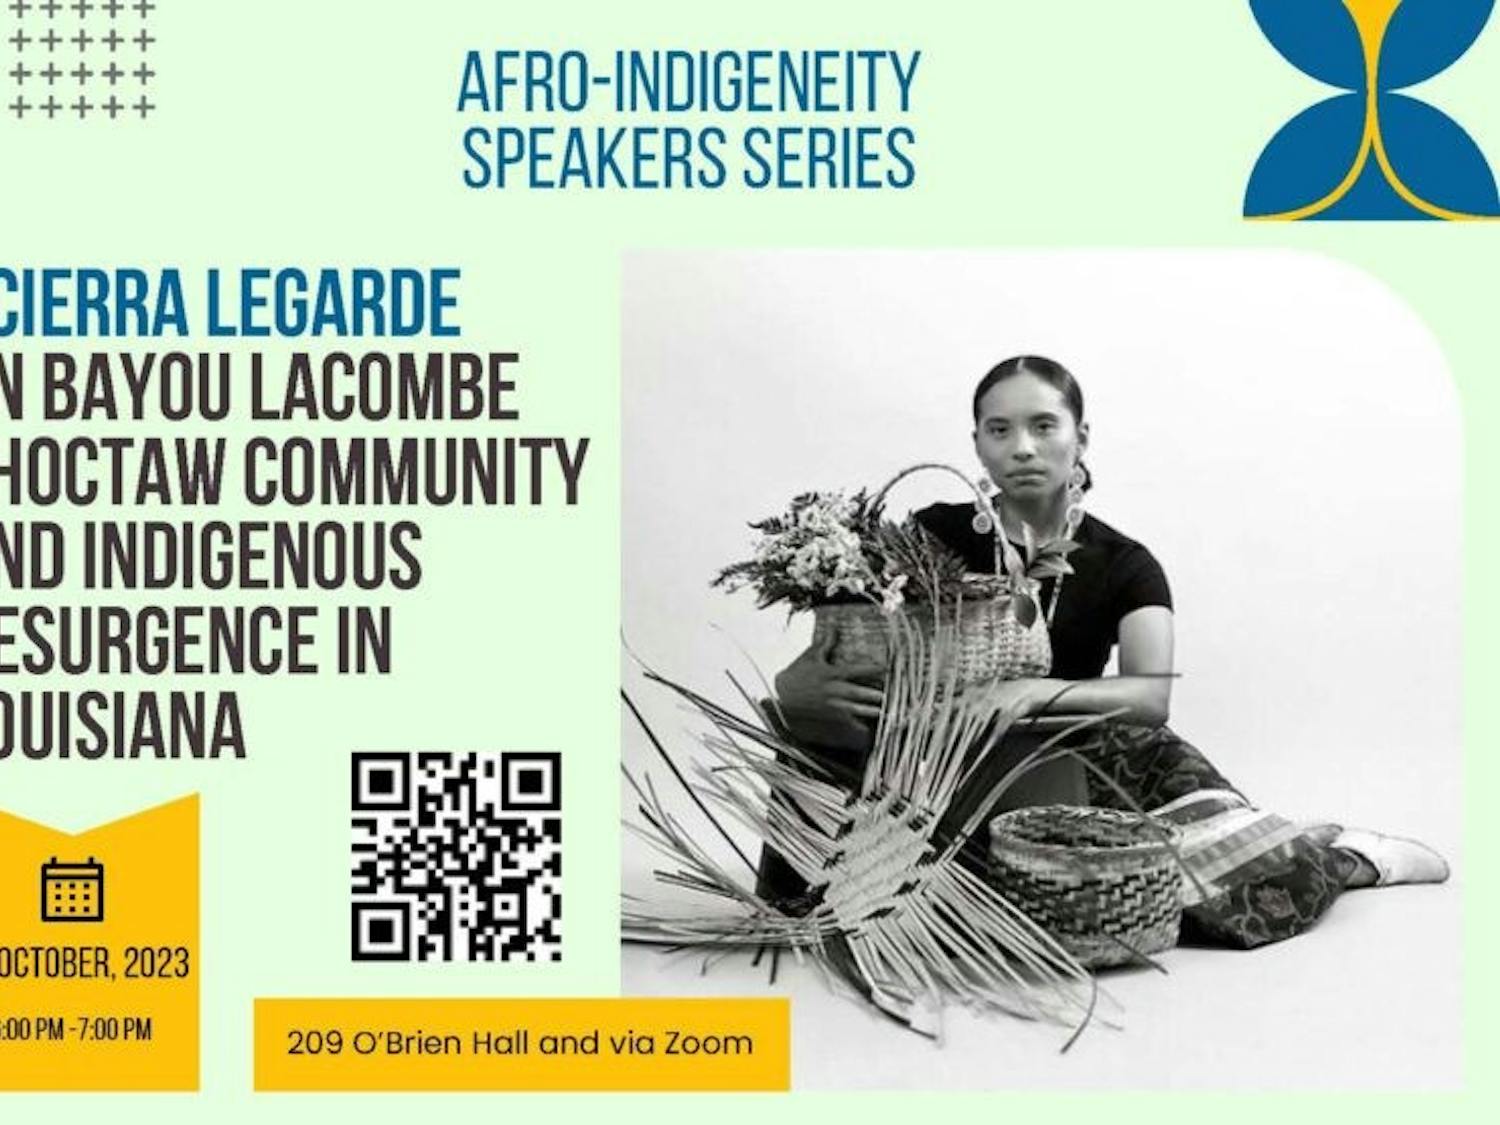 &nbsp;Scierra LeGarde's on-campus speech followed the Bayou Lacombe Choctaw's story from the pre-colonial era to today.&nbsp;